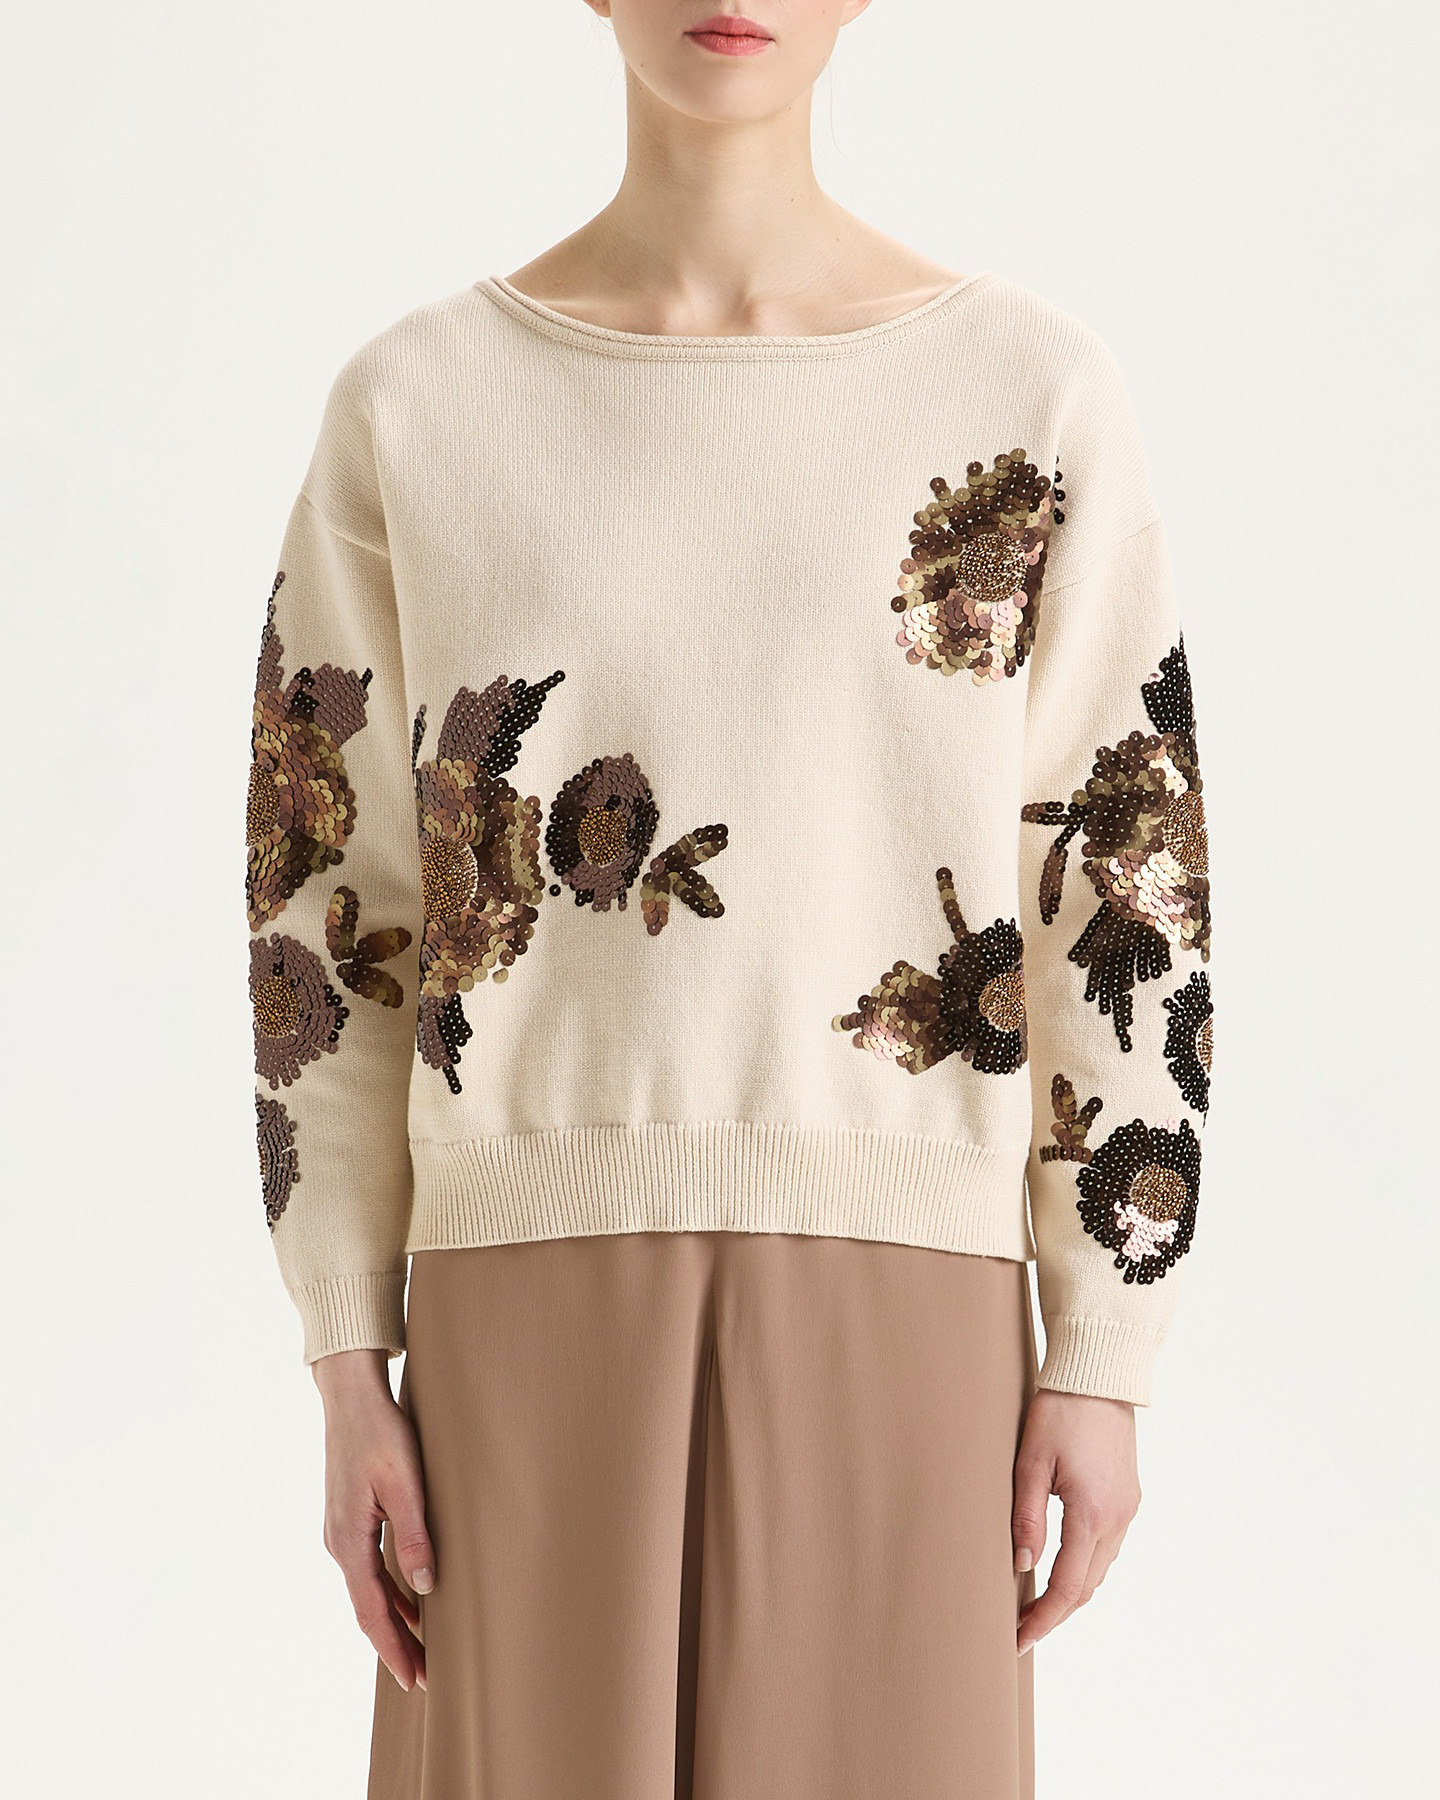 FLOWERS EMBROIDERY SWEATER - NATURAL